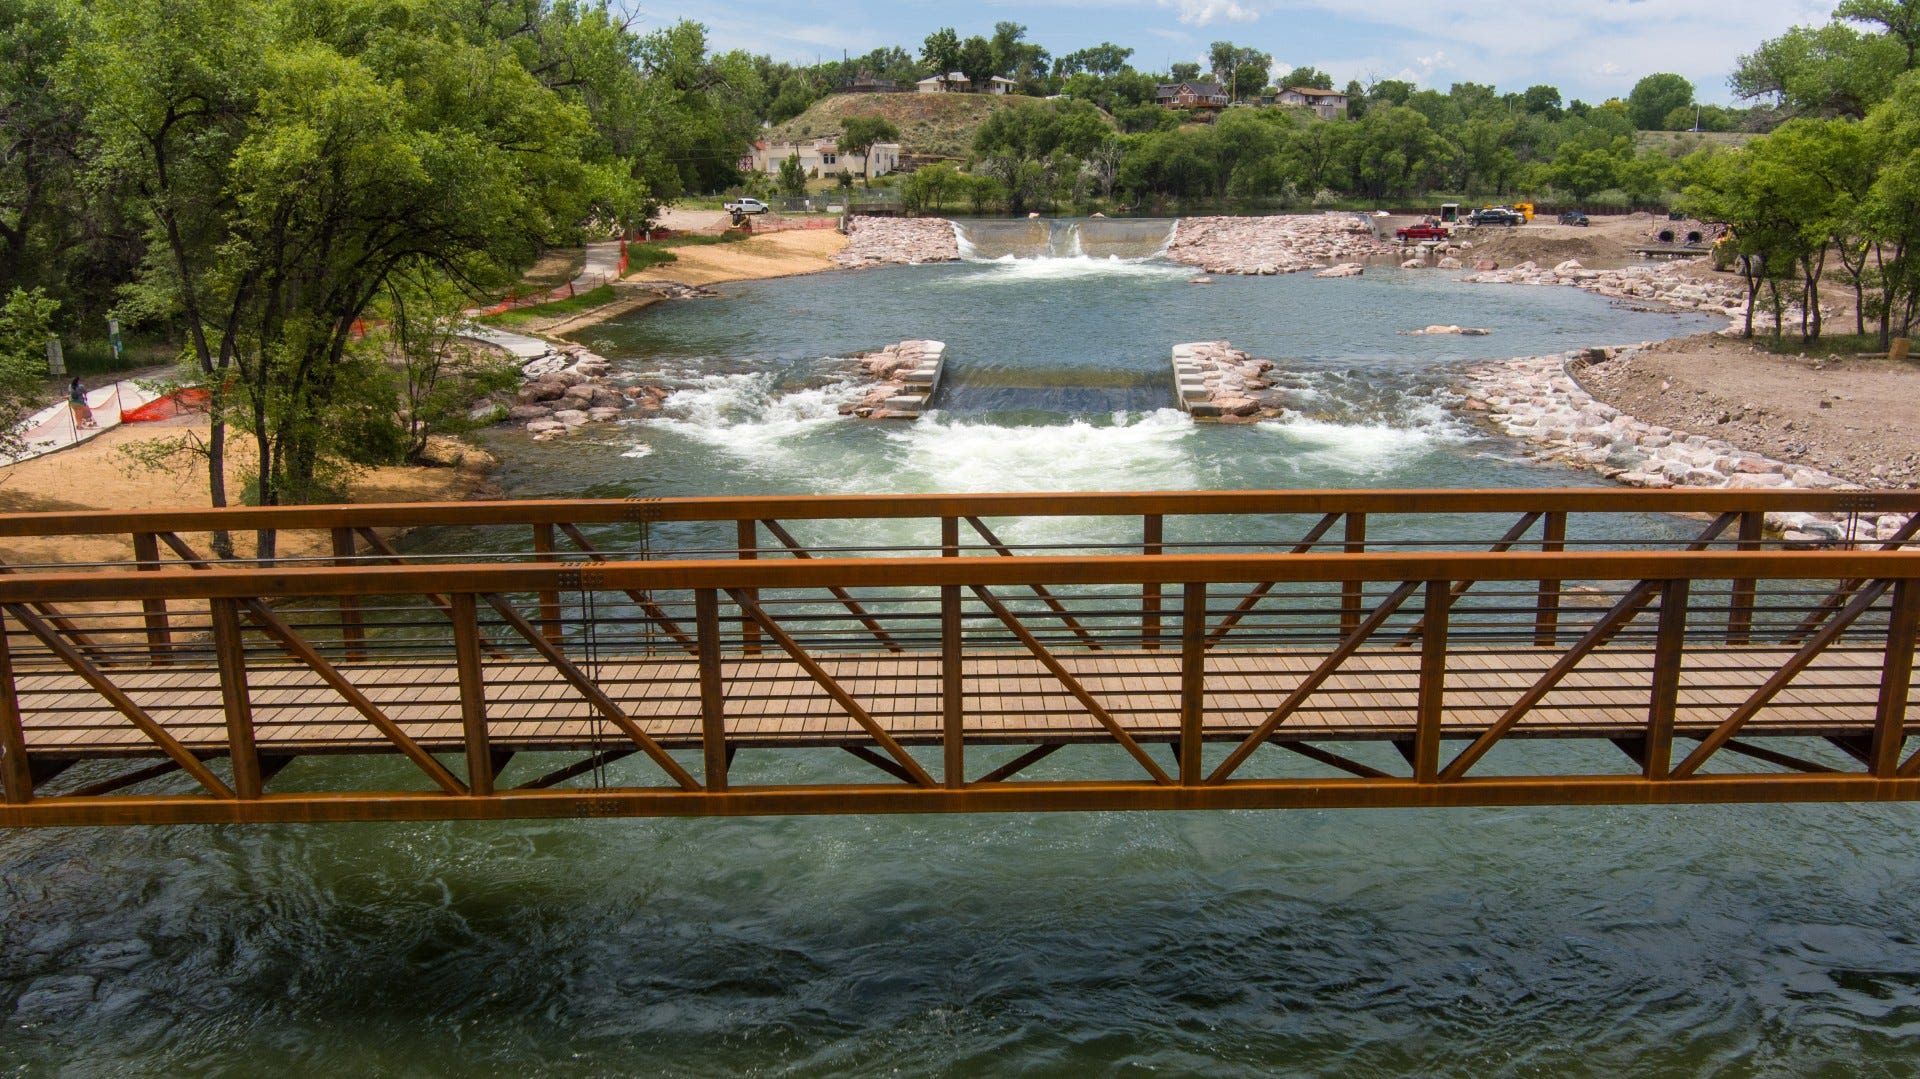 Summer runoff creating high levels in the Arkansas River; Pueblo Water Park remains closed